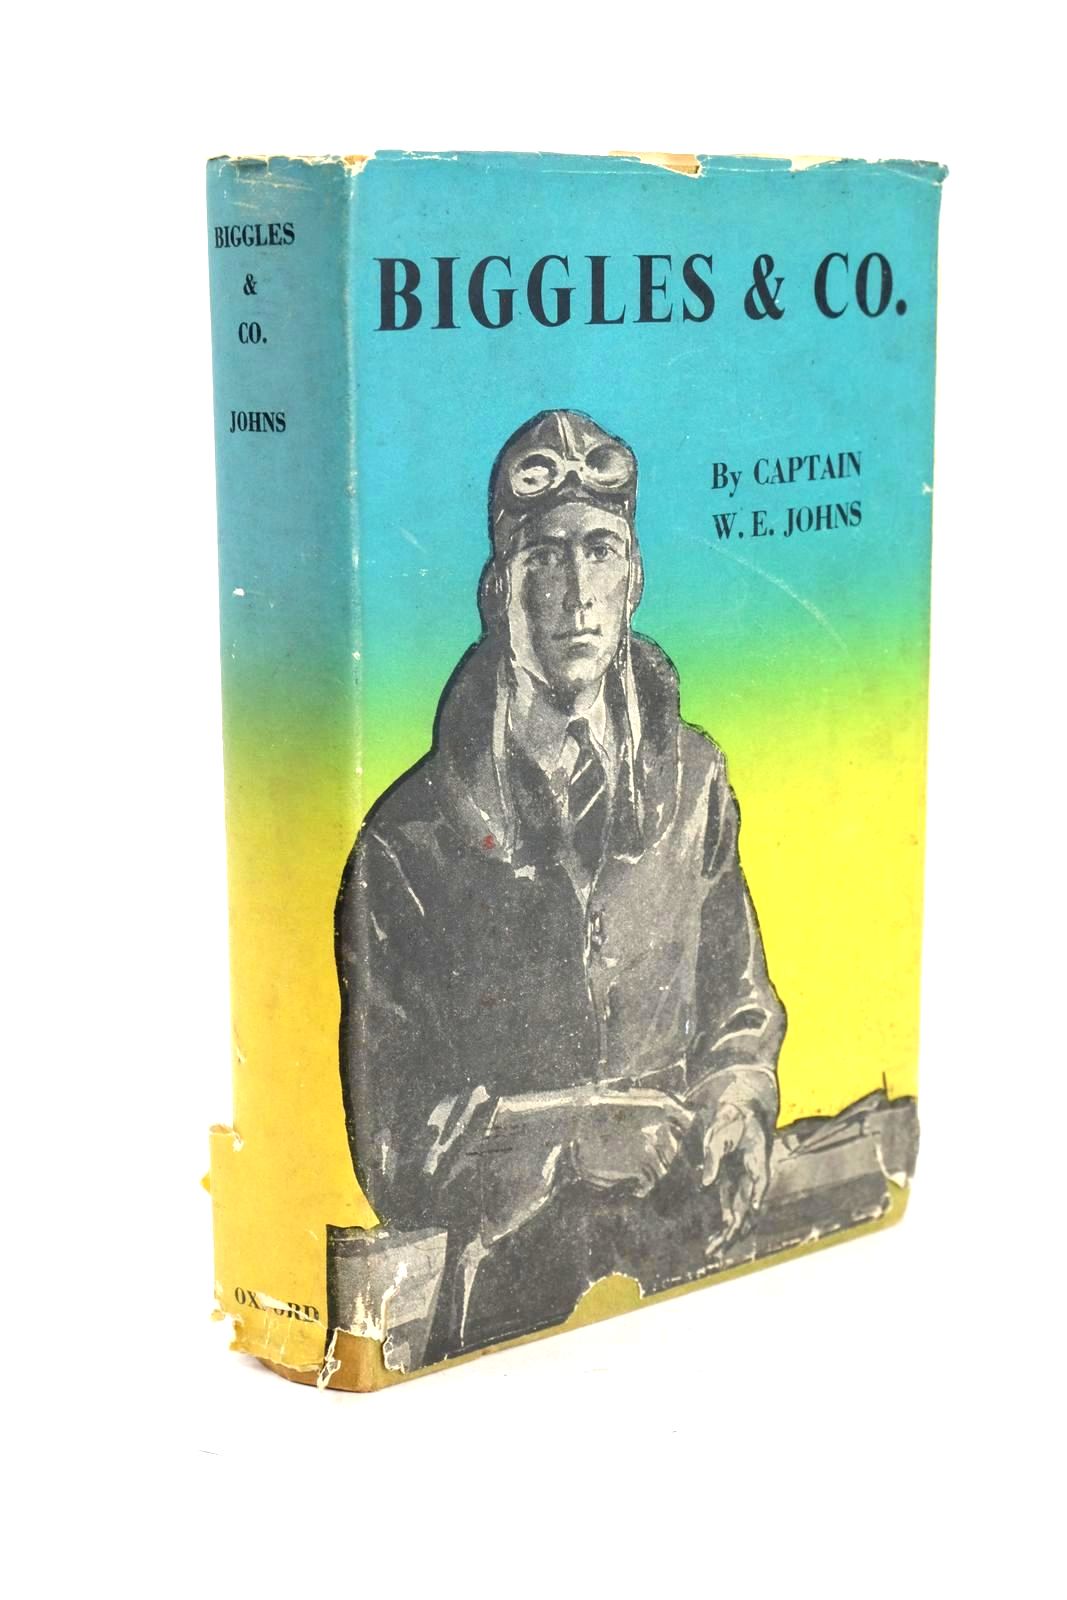 Photo of BIGGLES & CO.- Stock Number: 1326368